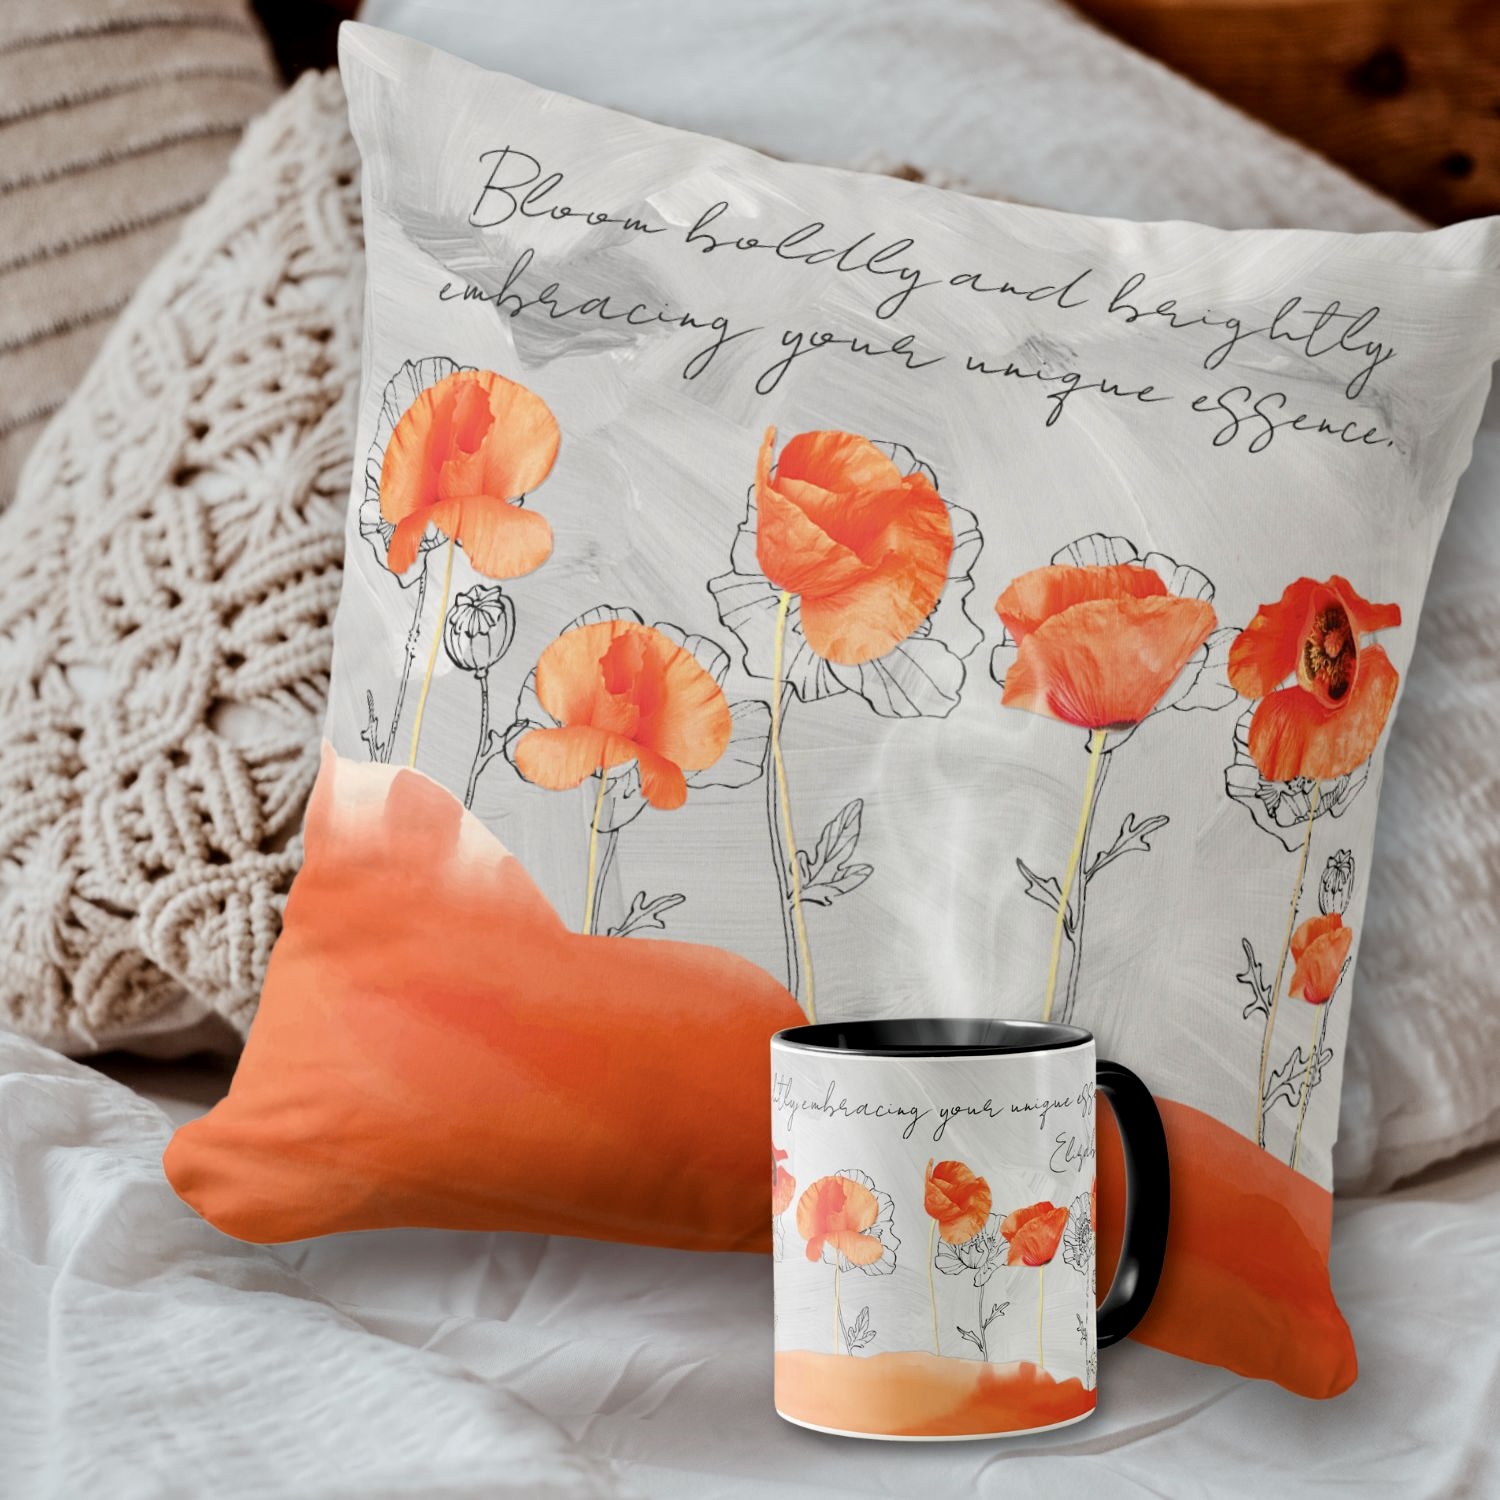 A bohemian-style mug and pillow adorned with orange and gray flowers, customizable with a name and personal message.